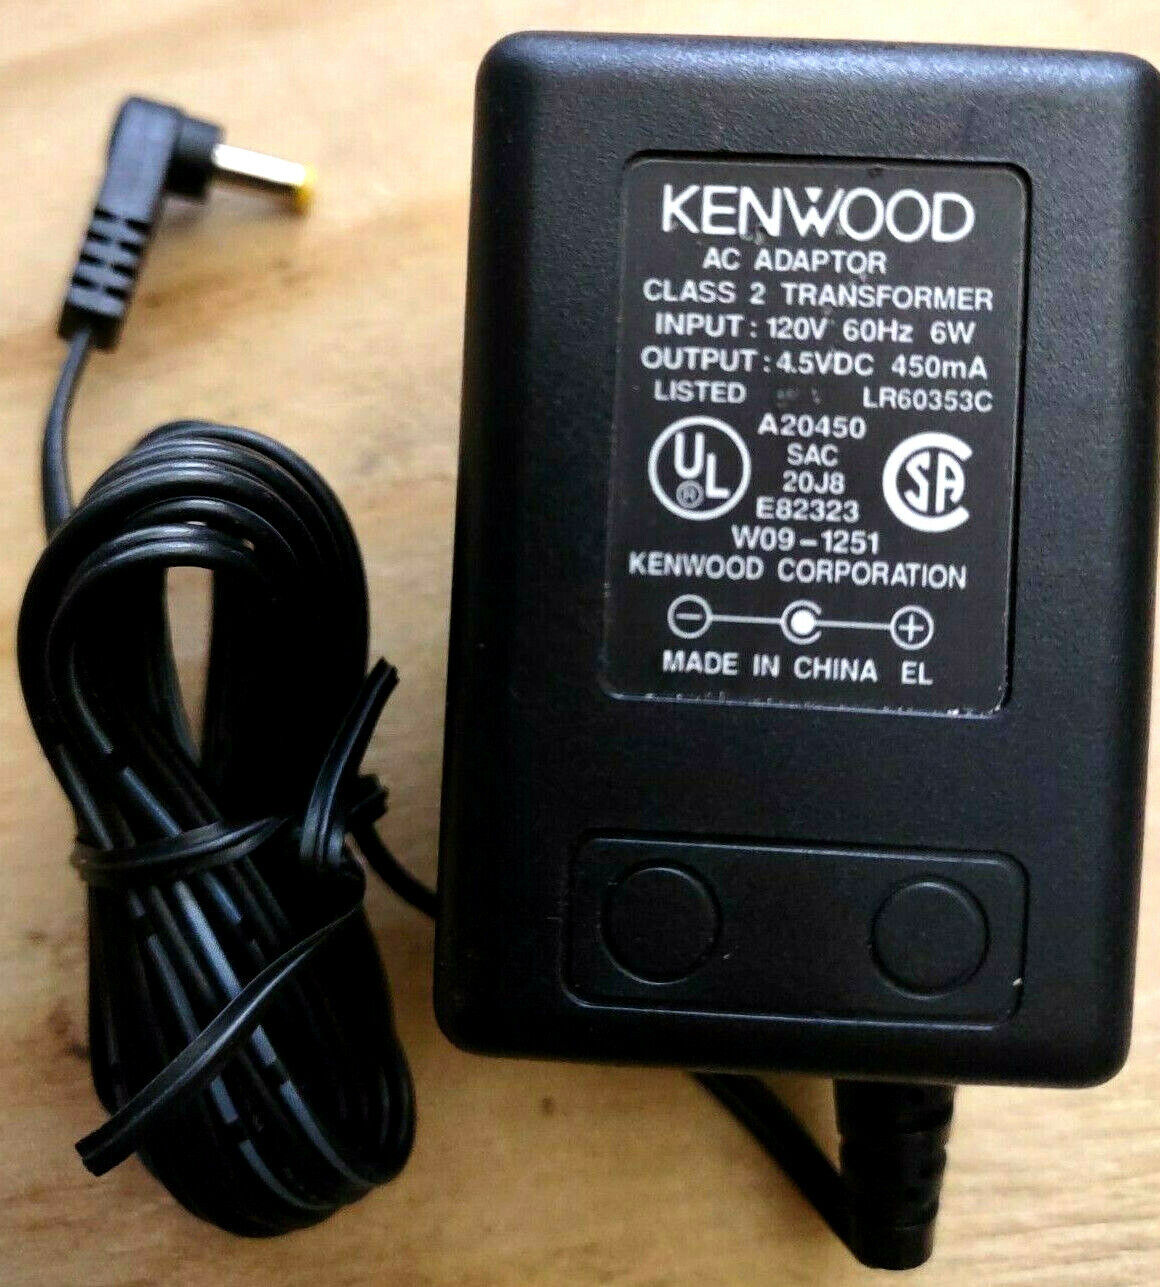 AC Adapter Charger for Kenwood A20450 E83323 W09-1251 Power Supply Cord Features: Powered Brand: Kenwood Cable Lengt